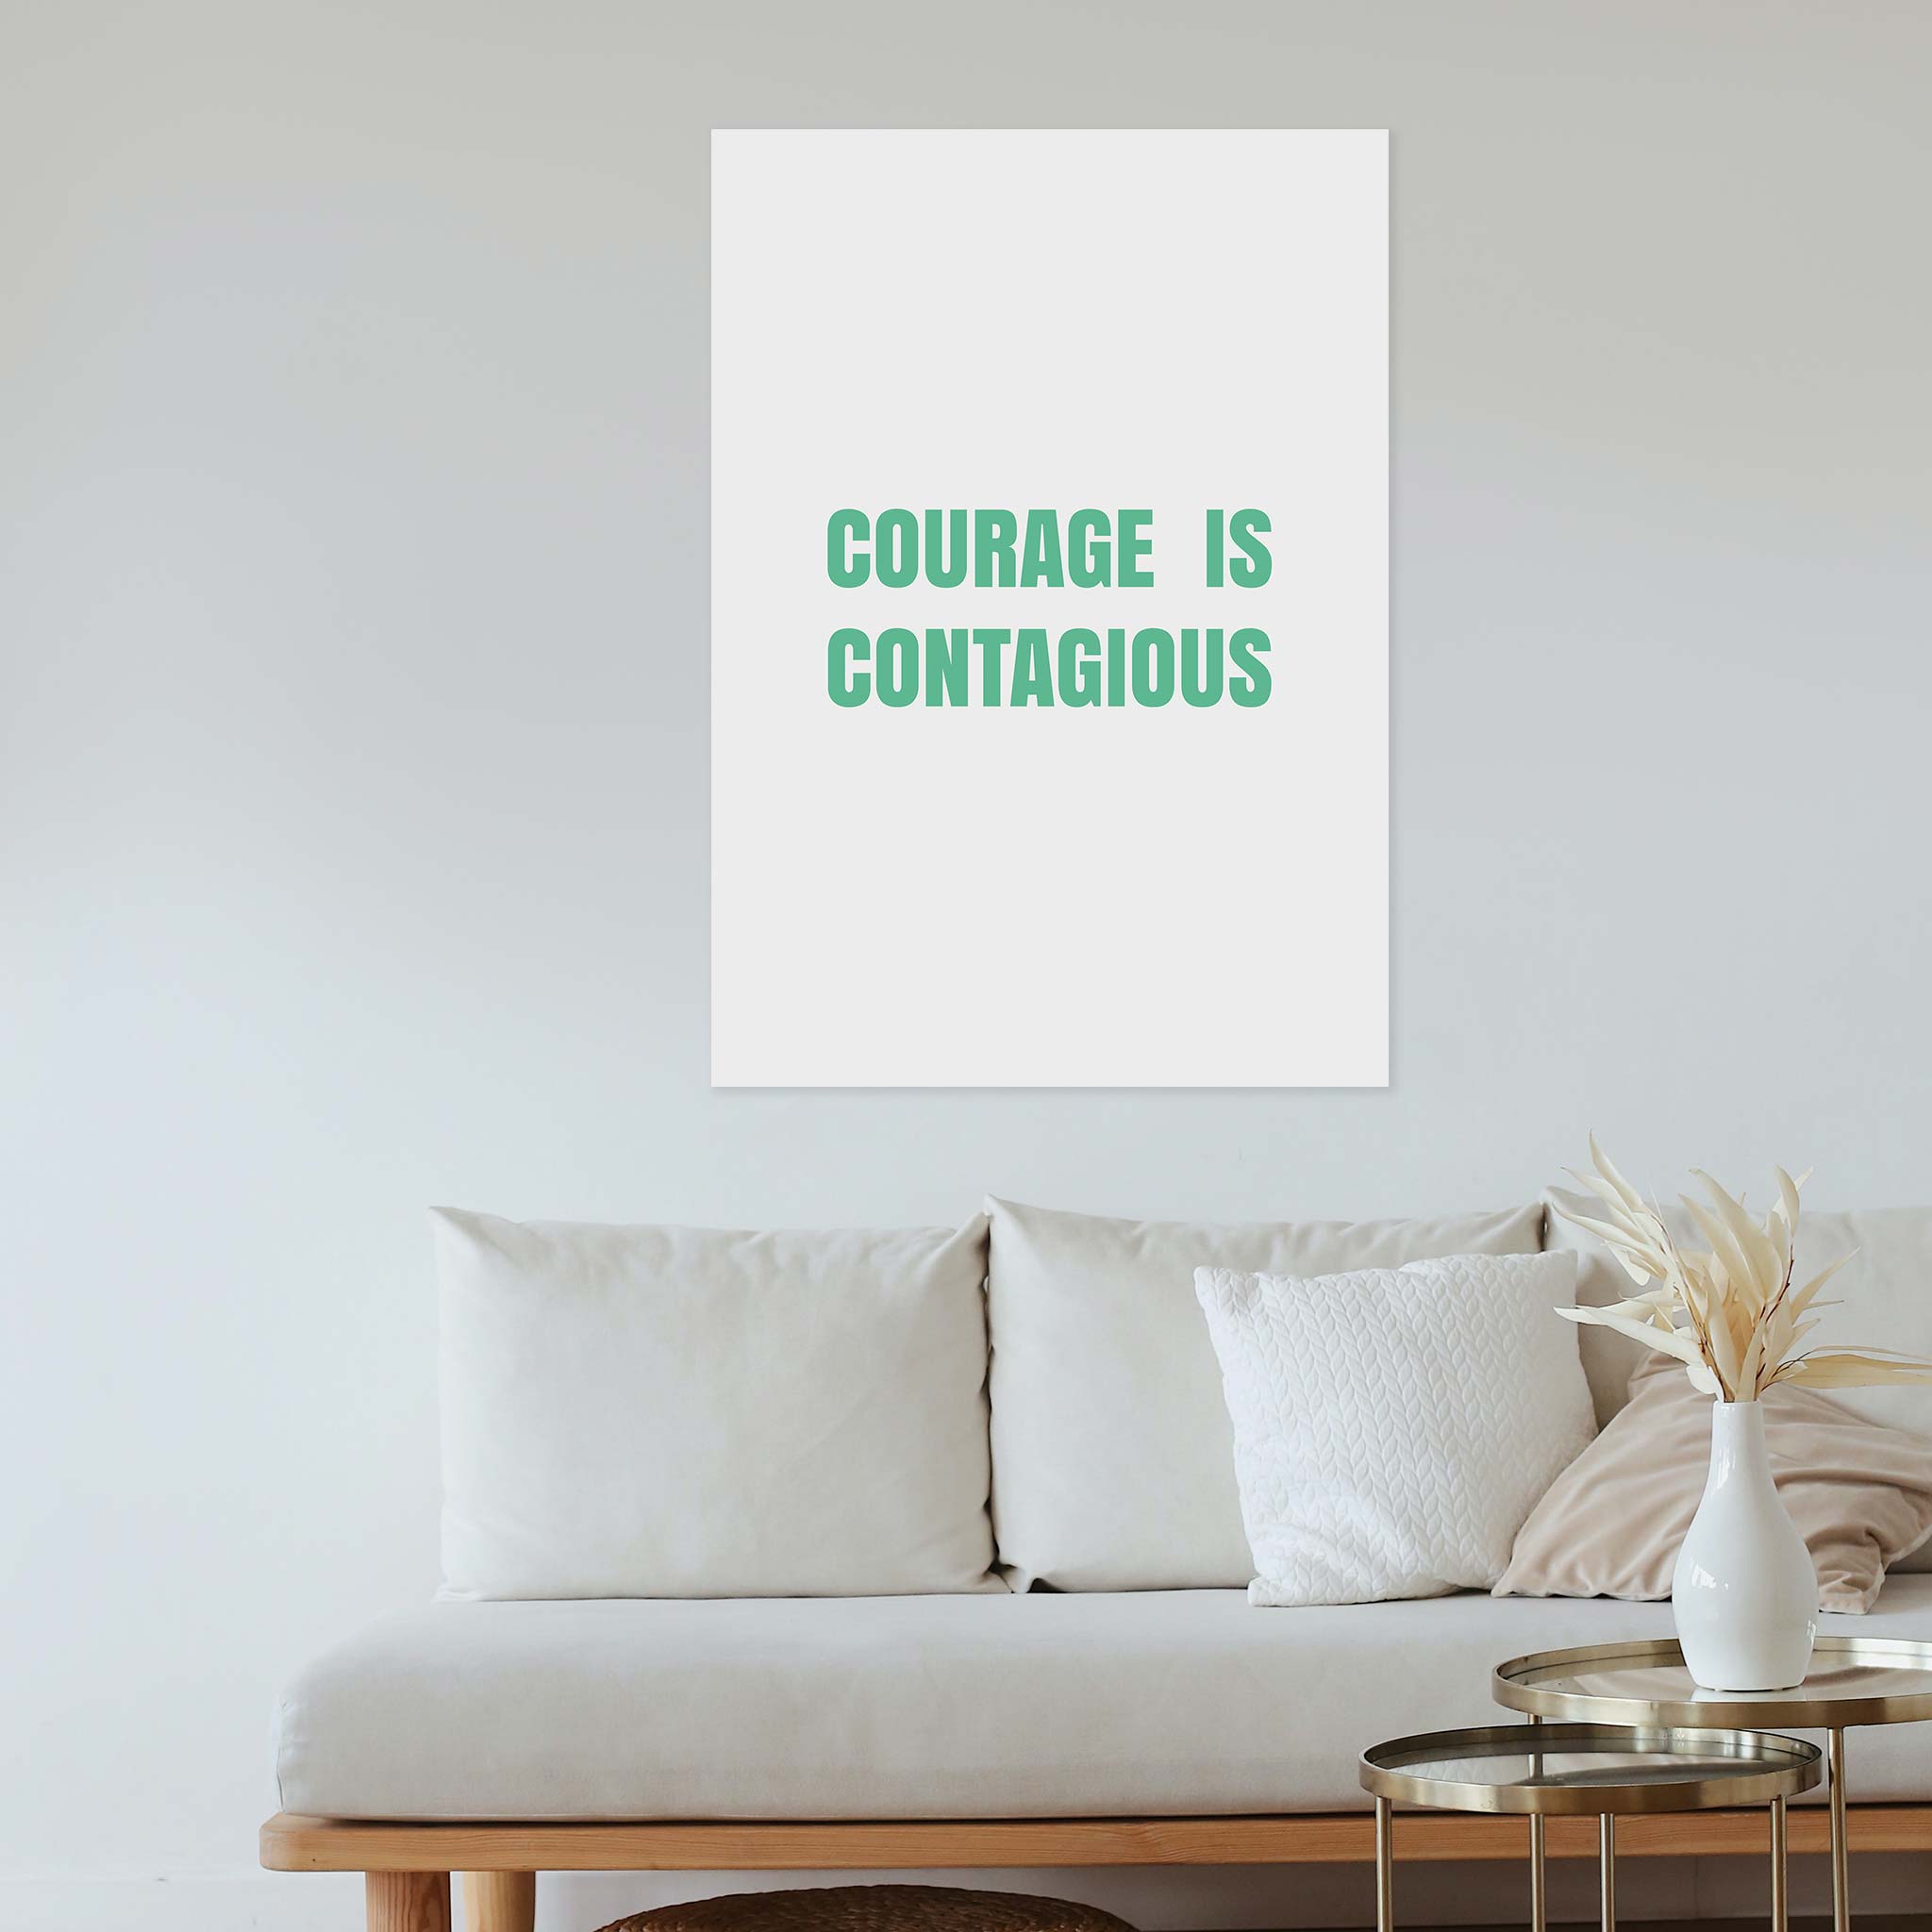 Courage is contagious